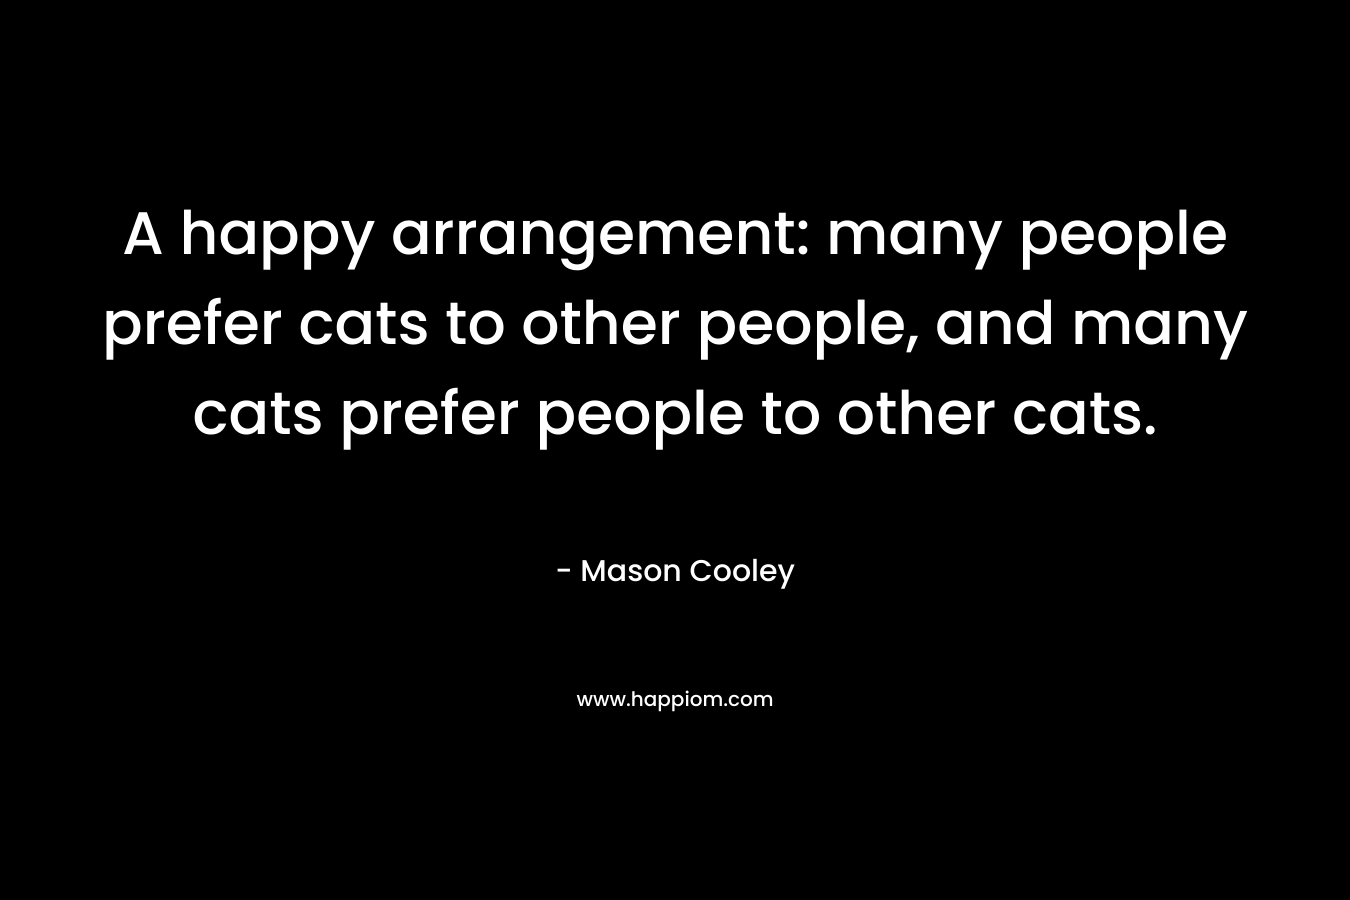 A happy arrangement: many people prefer cats to other people, and many cats prefer people to other cats. – Mason Cooley